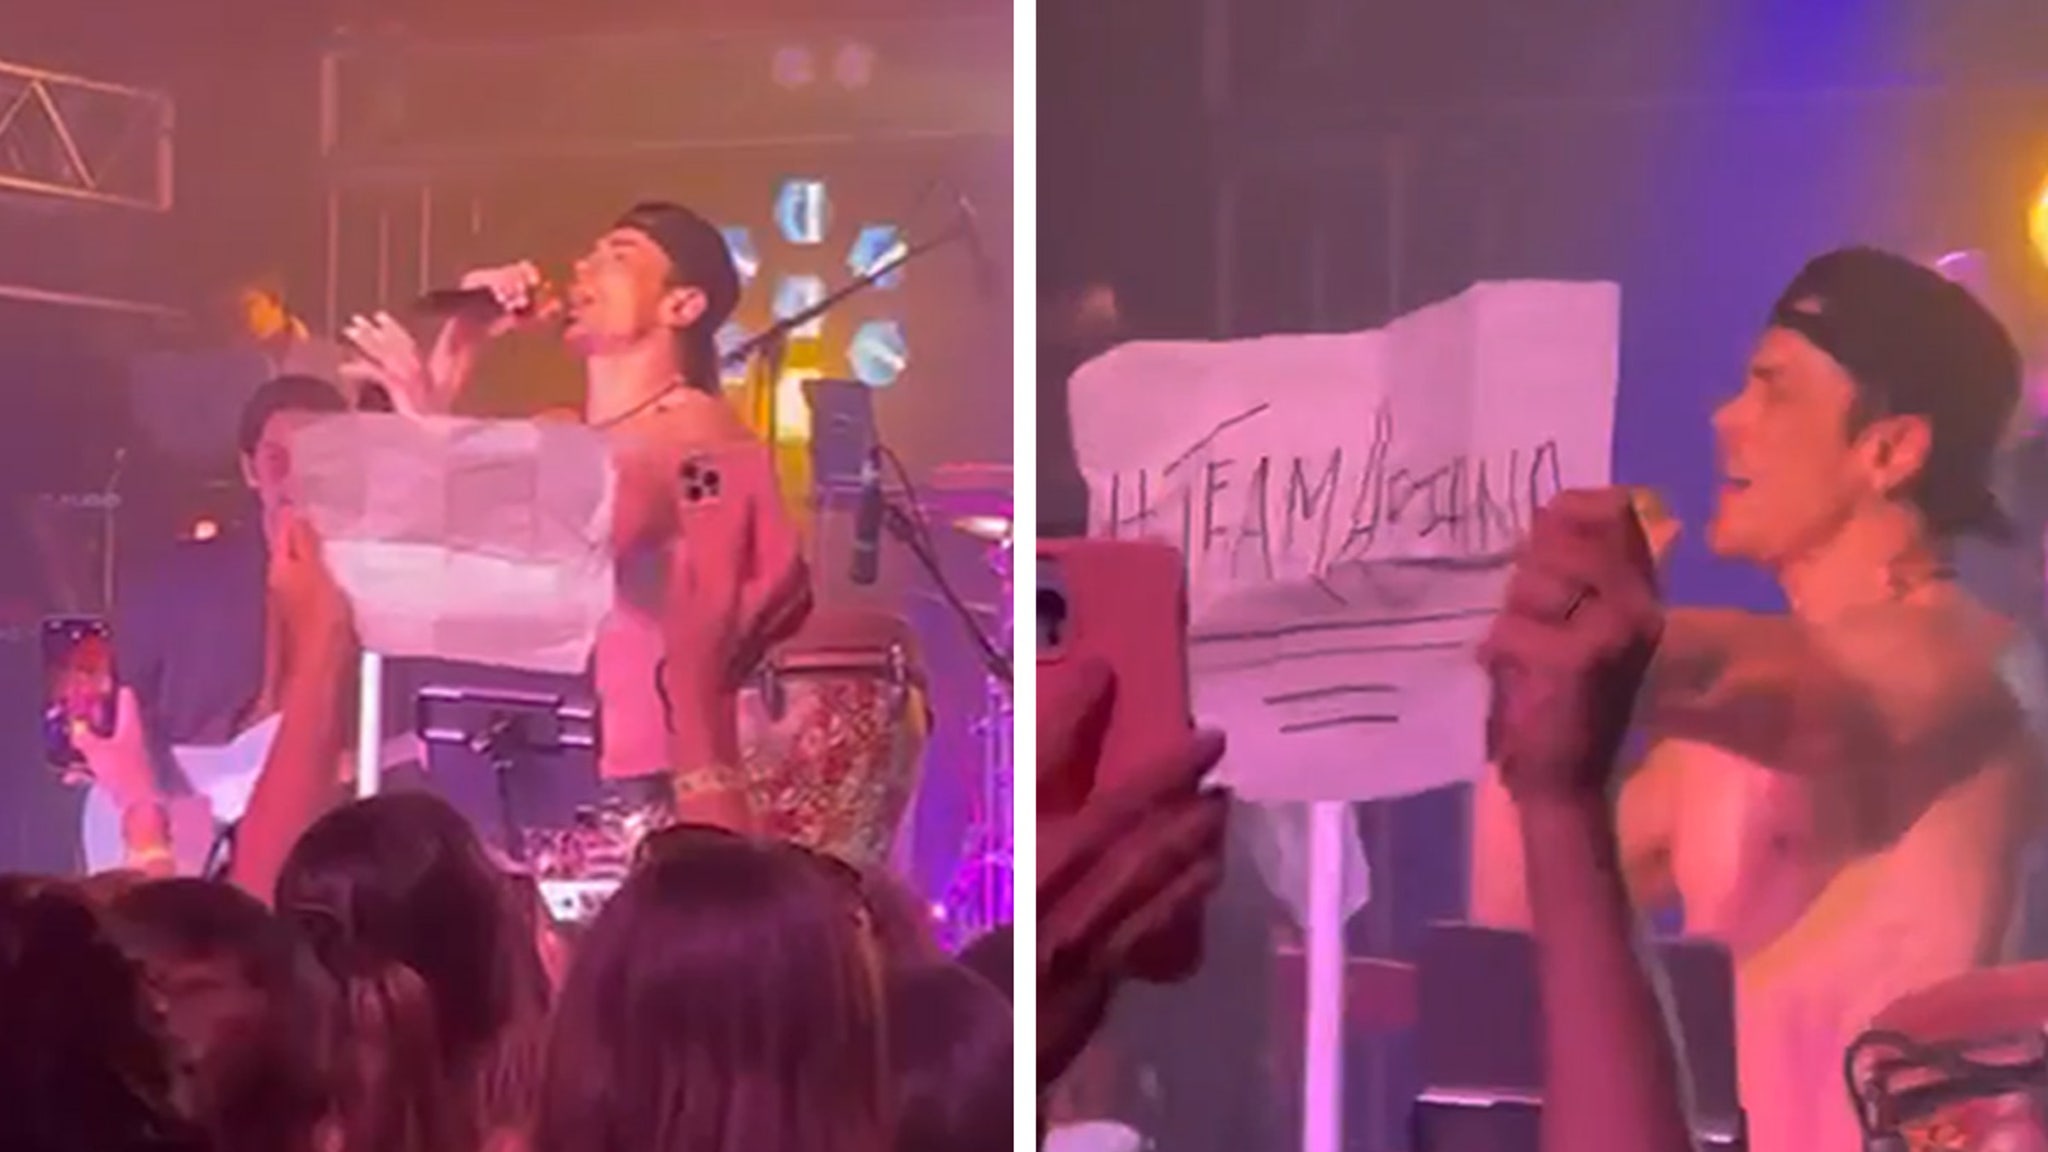 Tom Sandoval concert security removes fan with Ariana Madix sign